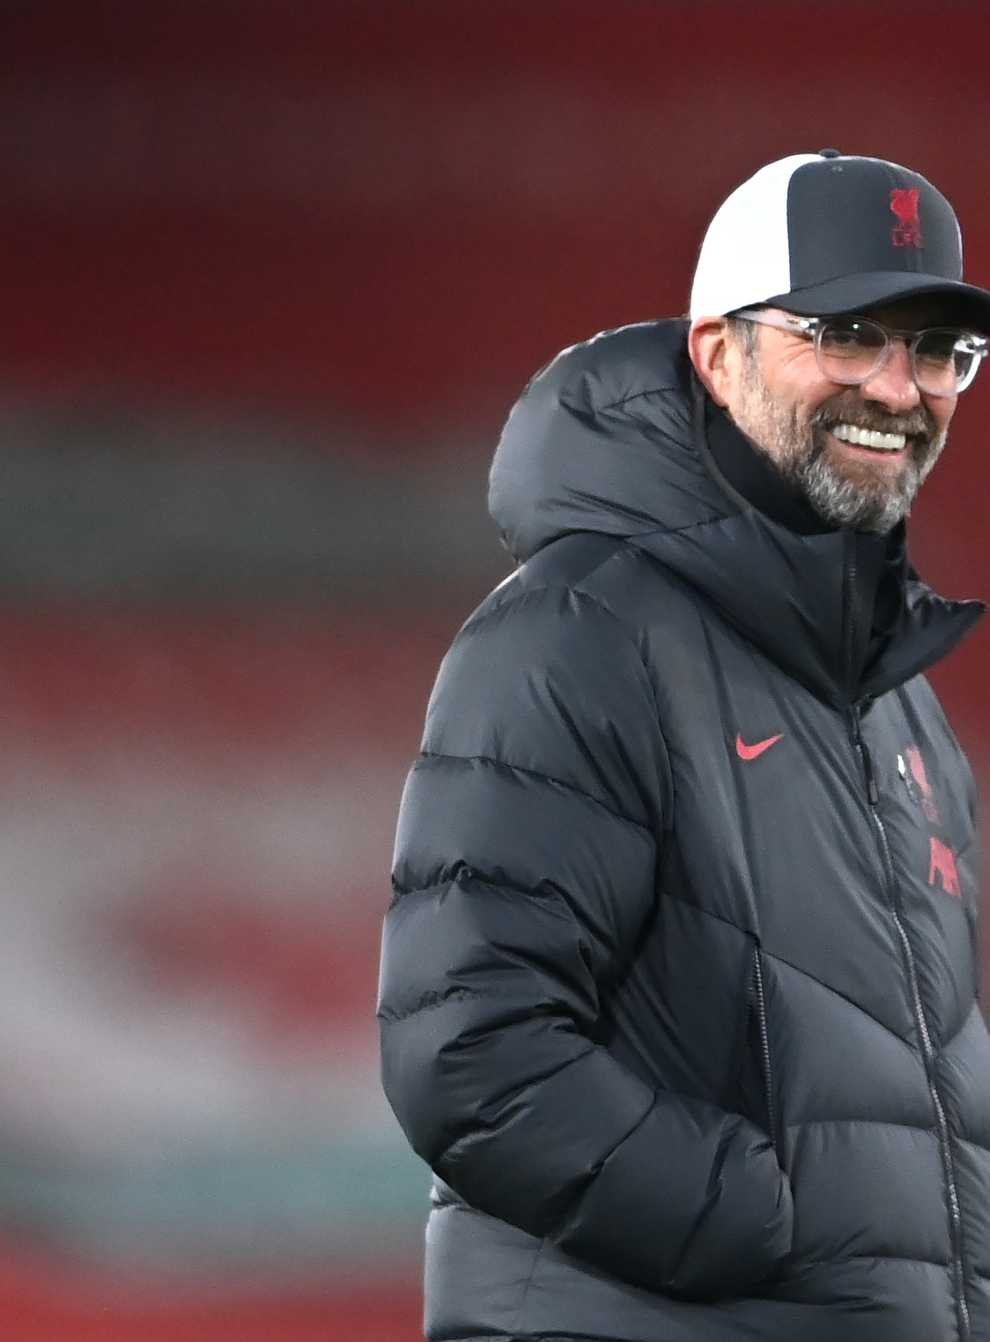 Liverpool's success brought another accolade for manager Jurgen Klopp